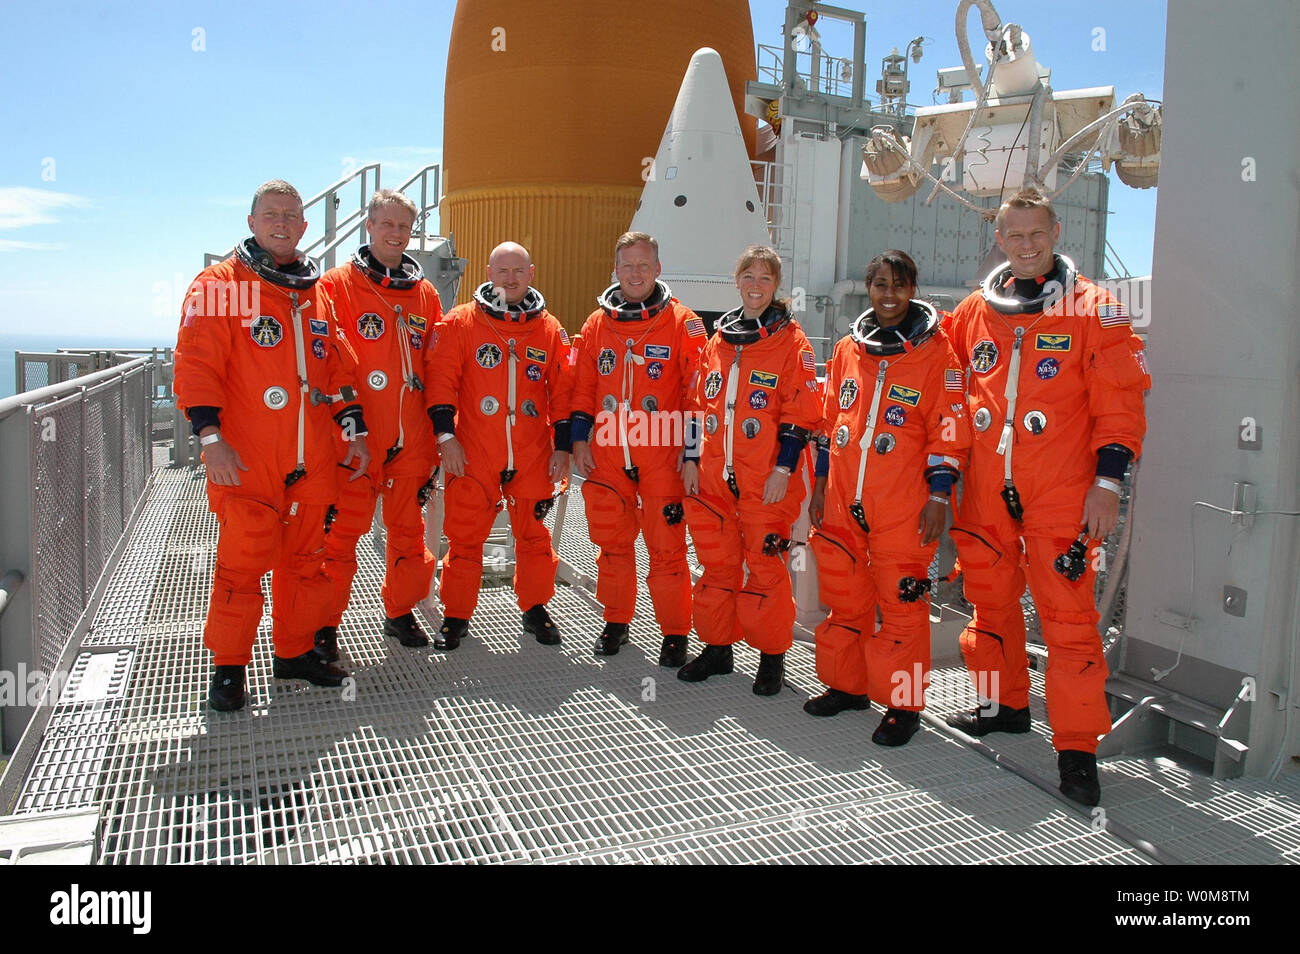 The STS-121 crew concludes emergency egress practice from Launch Pad 39B with a photo at the top of the fixed service structure at Kennedy Space Center on June 15, 2006. From left are Mission Specialists Michael Fossum and Thomas Reiter, Pilot Mark Kelly, Commander Steven Lindsey, and Mission Specialists Lisa Nowak, Stephanie Wilson and Piers Sellers. Reiter is from Germany and represents the European Space Agency. The crew has been taking part in Terminal Countdown Demonstration Test (TCDT) activities that include a simulated countdown culminating in main engine cutoff. Mission STS-121 is sch Stock Photo